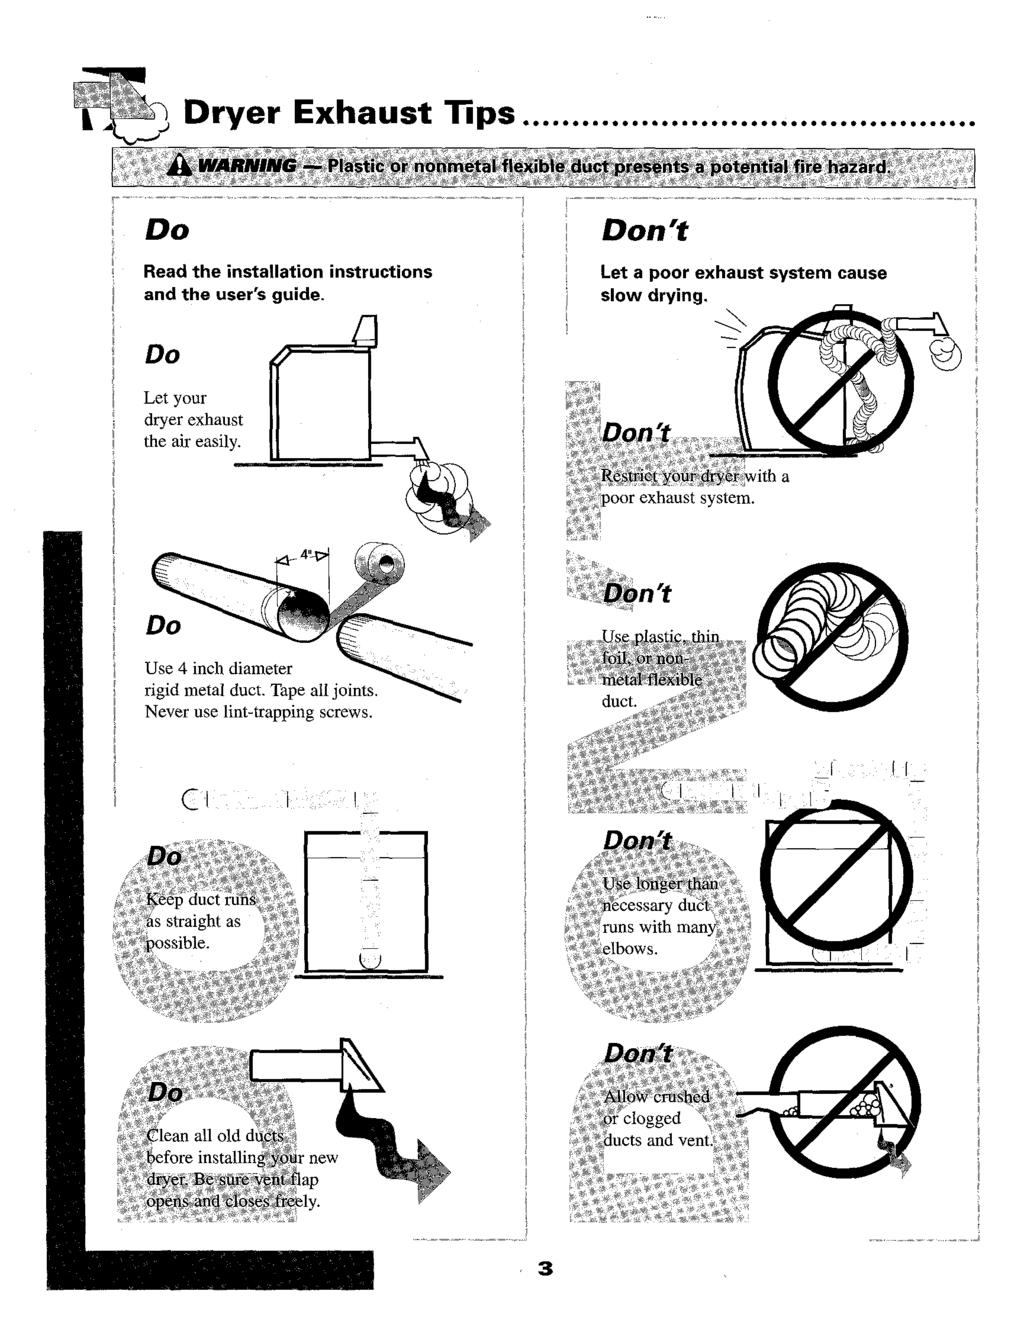 Dryer Exhaust ]tips...... Do Read the installation instructions and the user's guide. Don't Let a poor exhaust system cause slow drying.